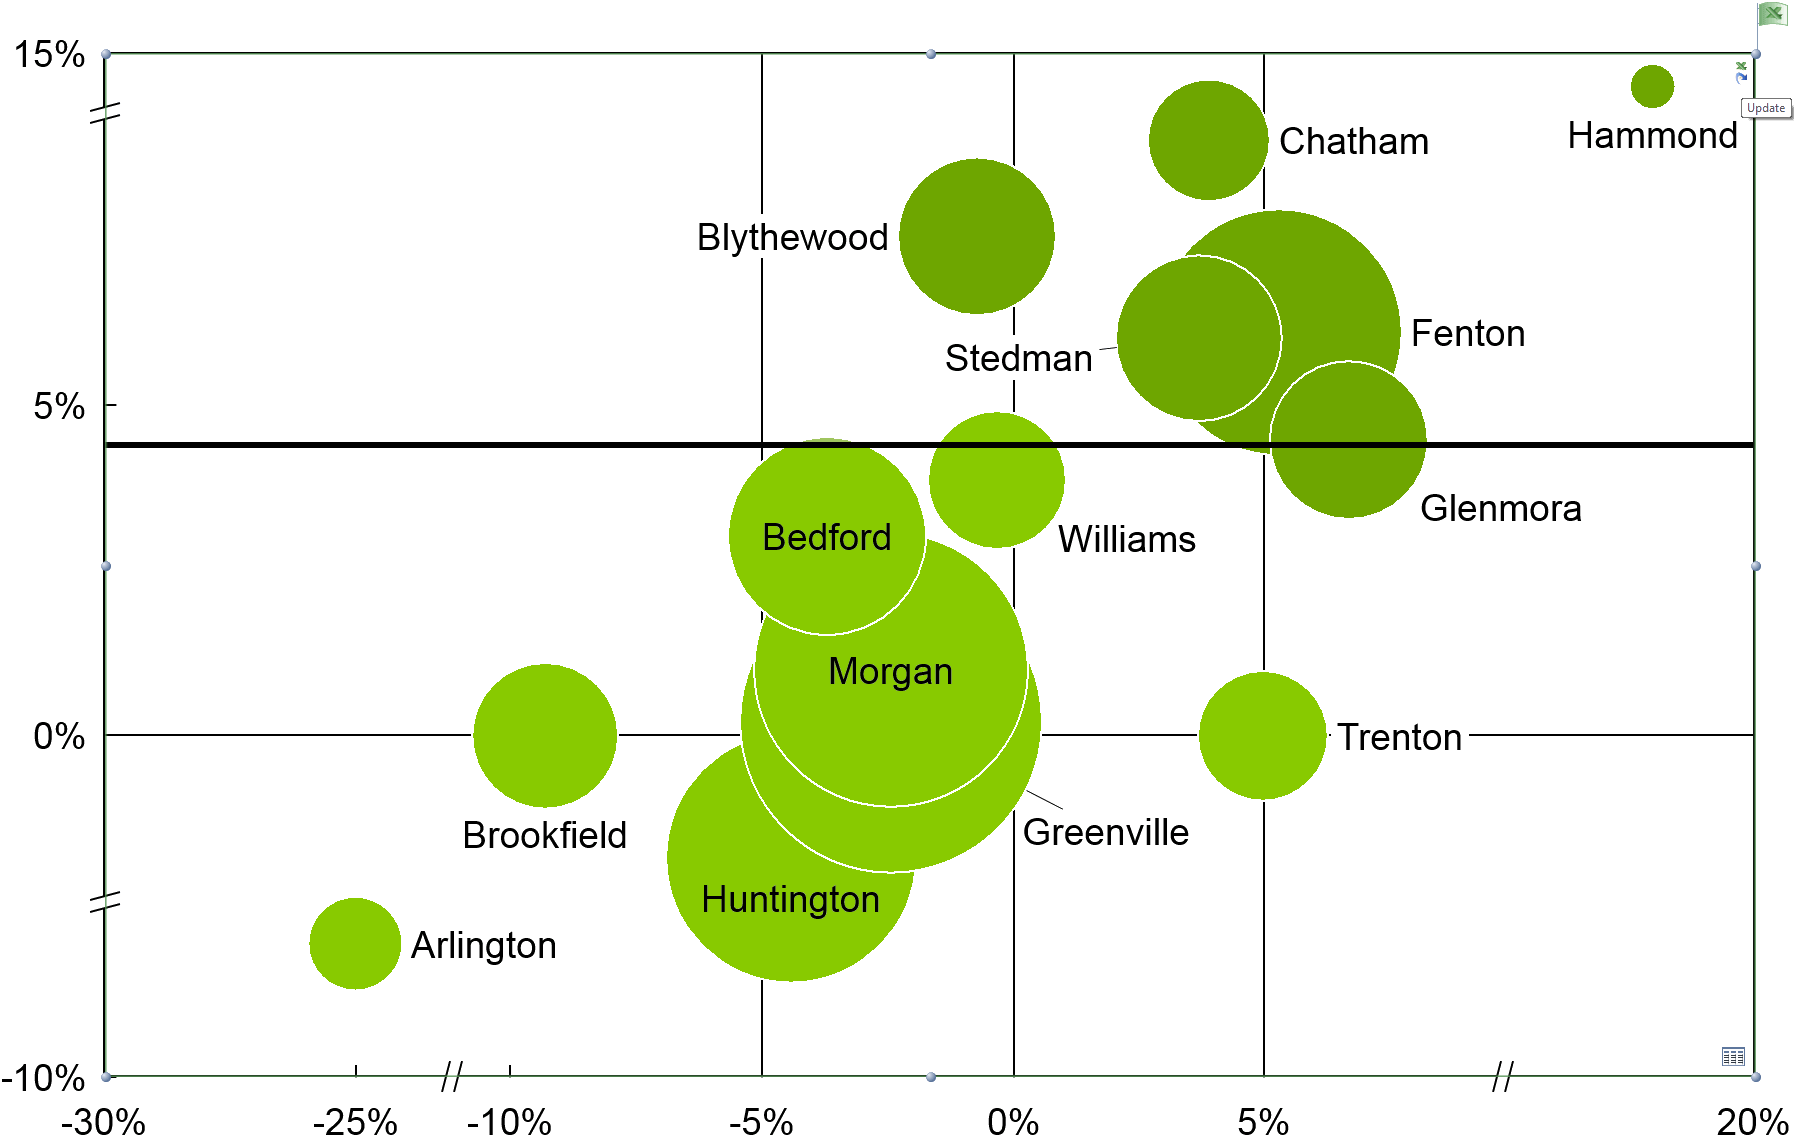 Bubble chart linked to data